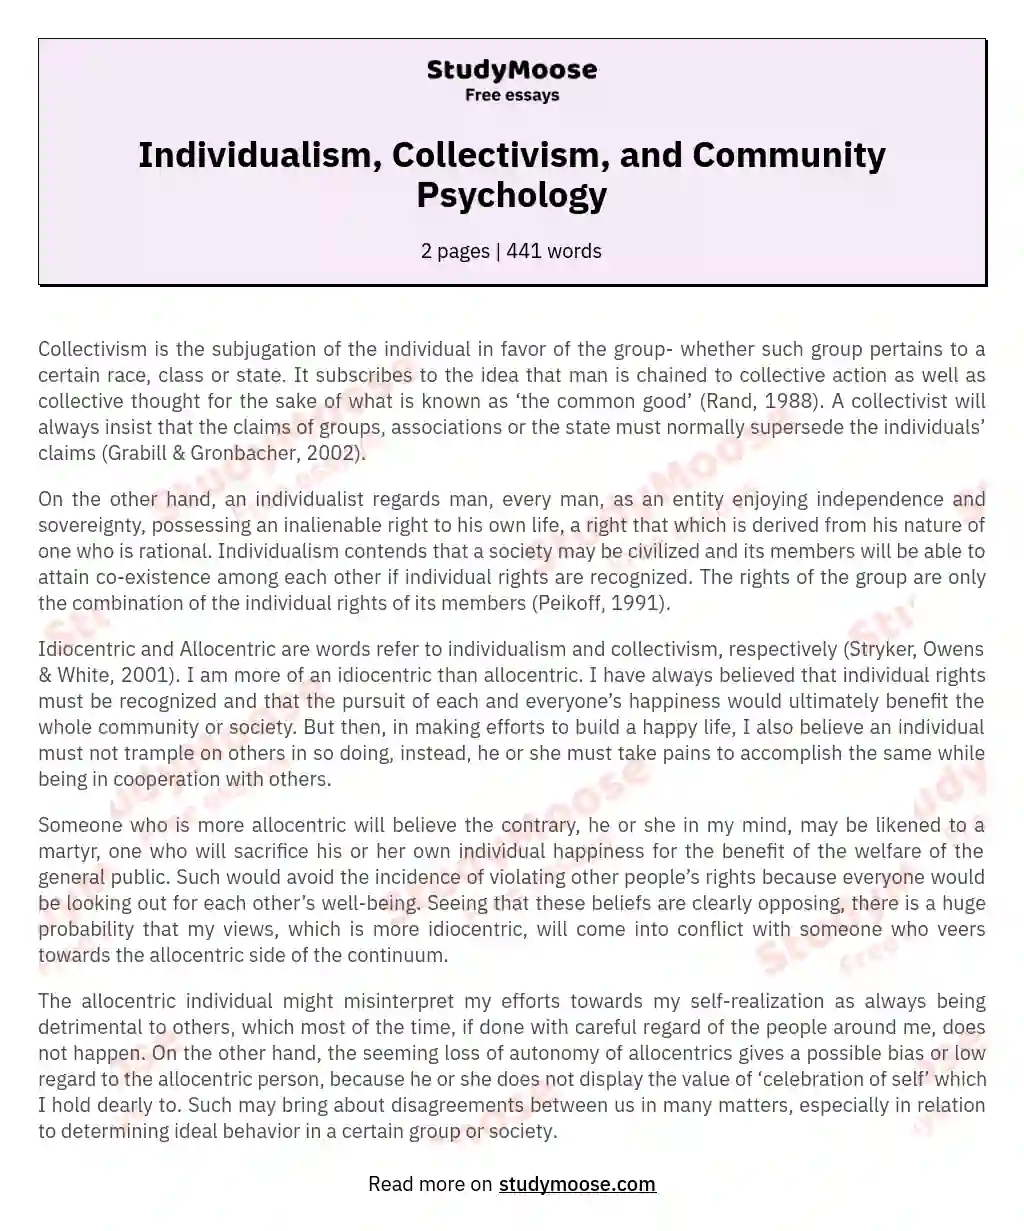 Individualism, Collectivism, and Community Psychology essay